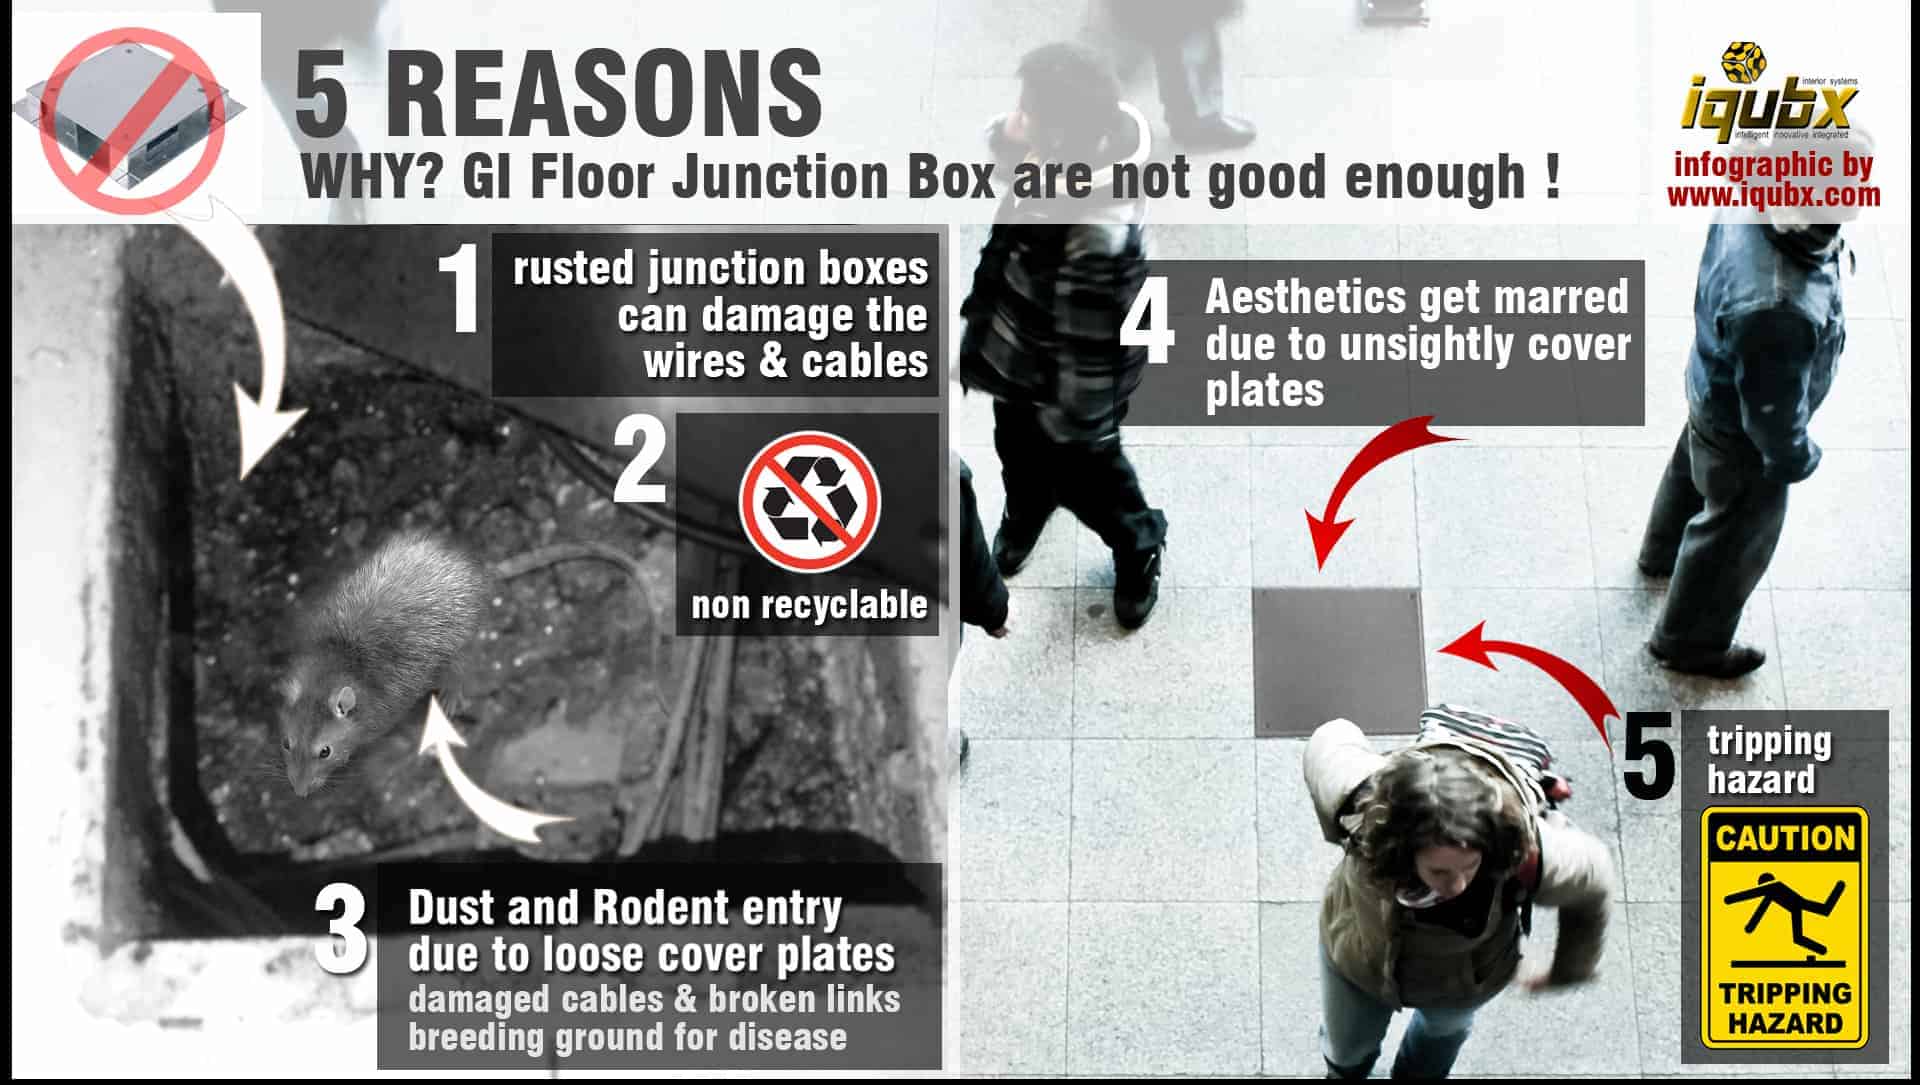 5 reasons why GI junction boxes are not good - infographic by www.iqubx.com